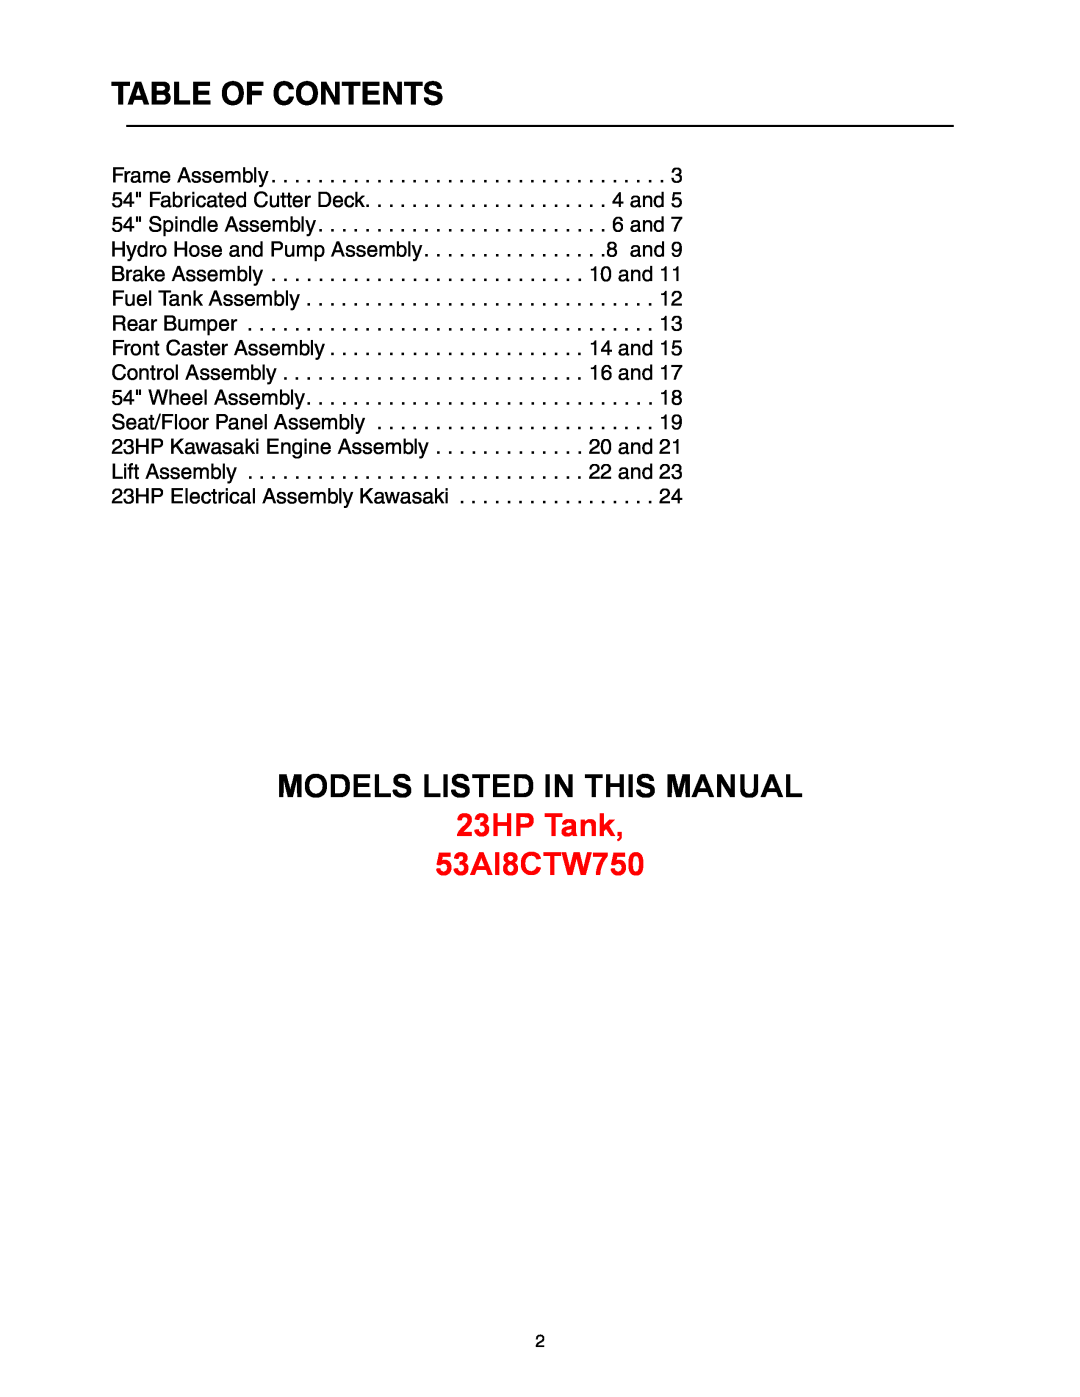 Cub Cadet manual Table Of Contents, Models Listed In This Manual, 23HP Tank 53AI8CTW750 